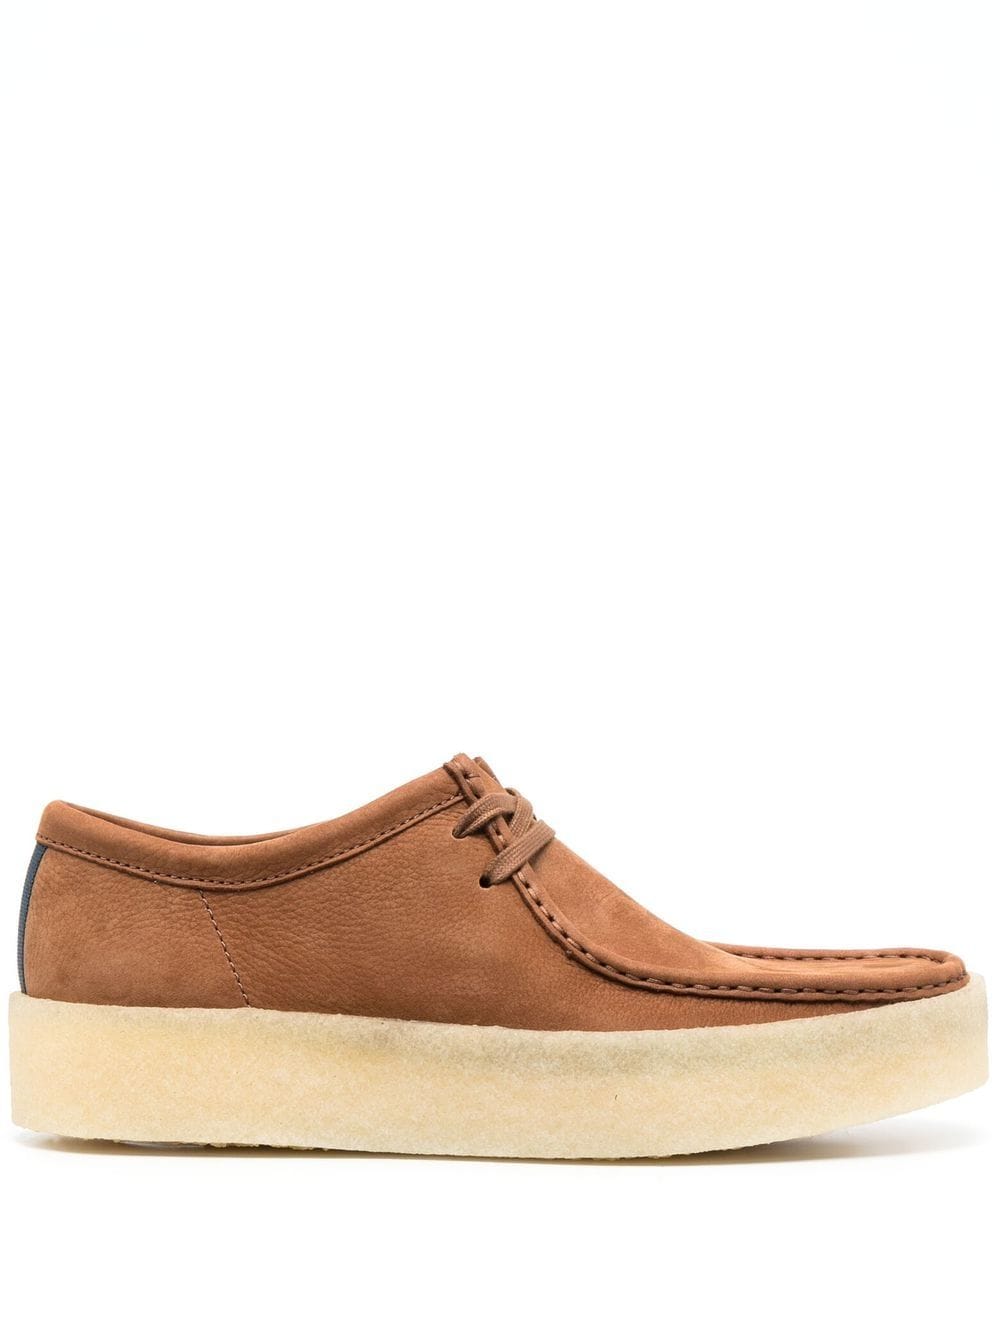 CLARKS ORIGINALS LACE-UP LOAFERS